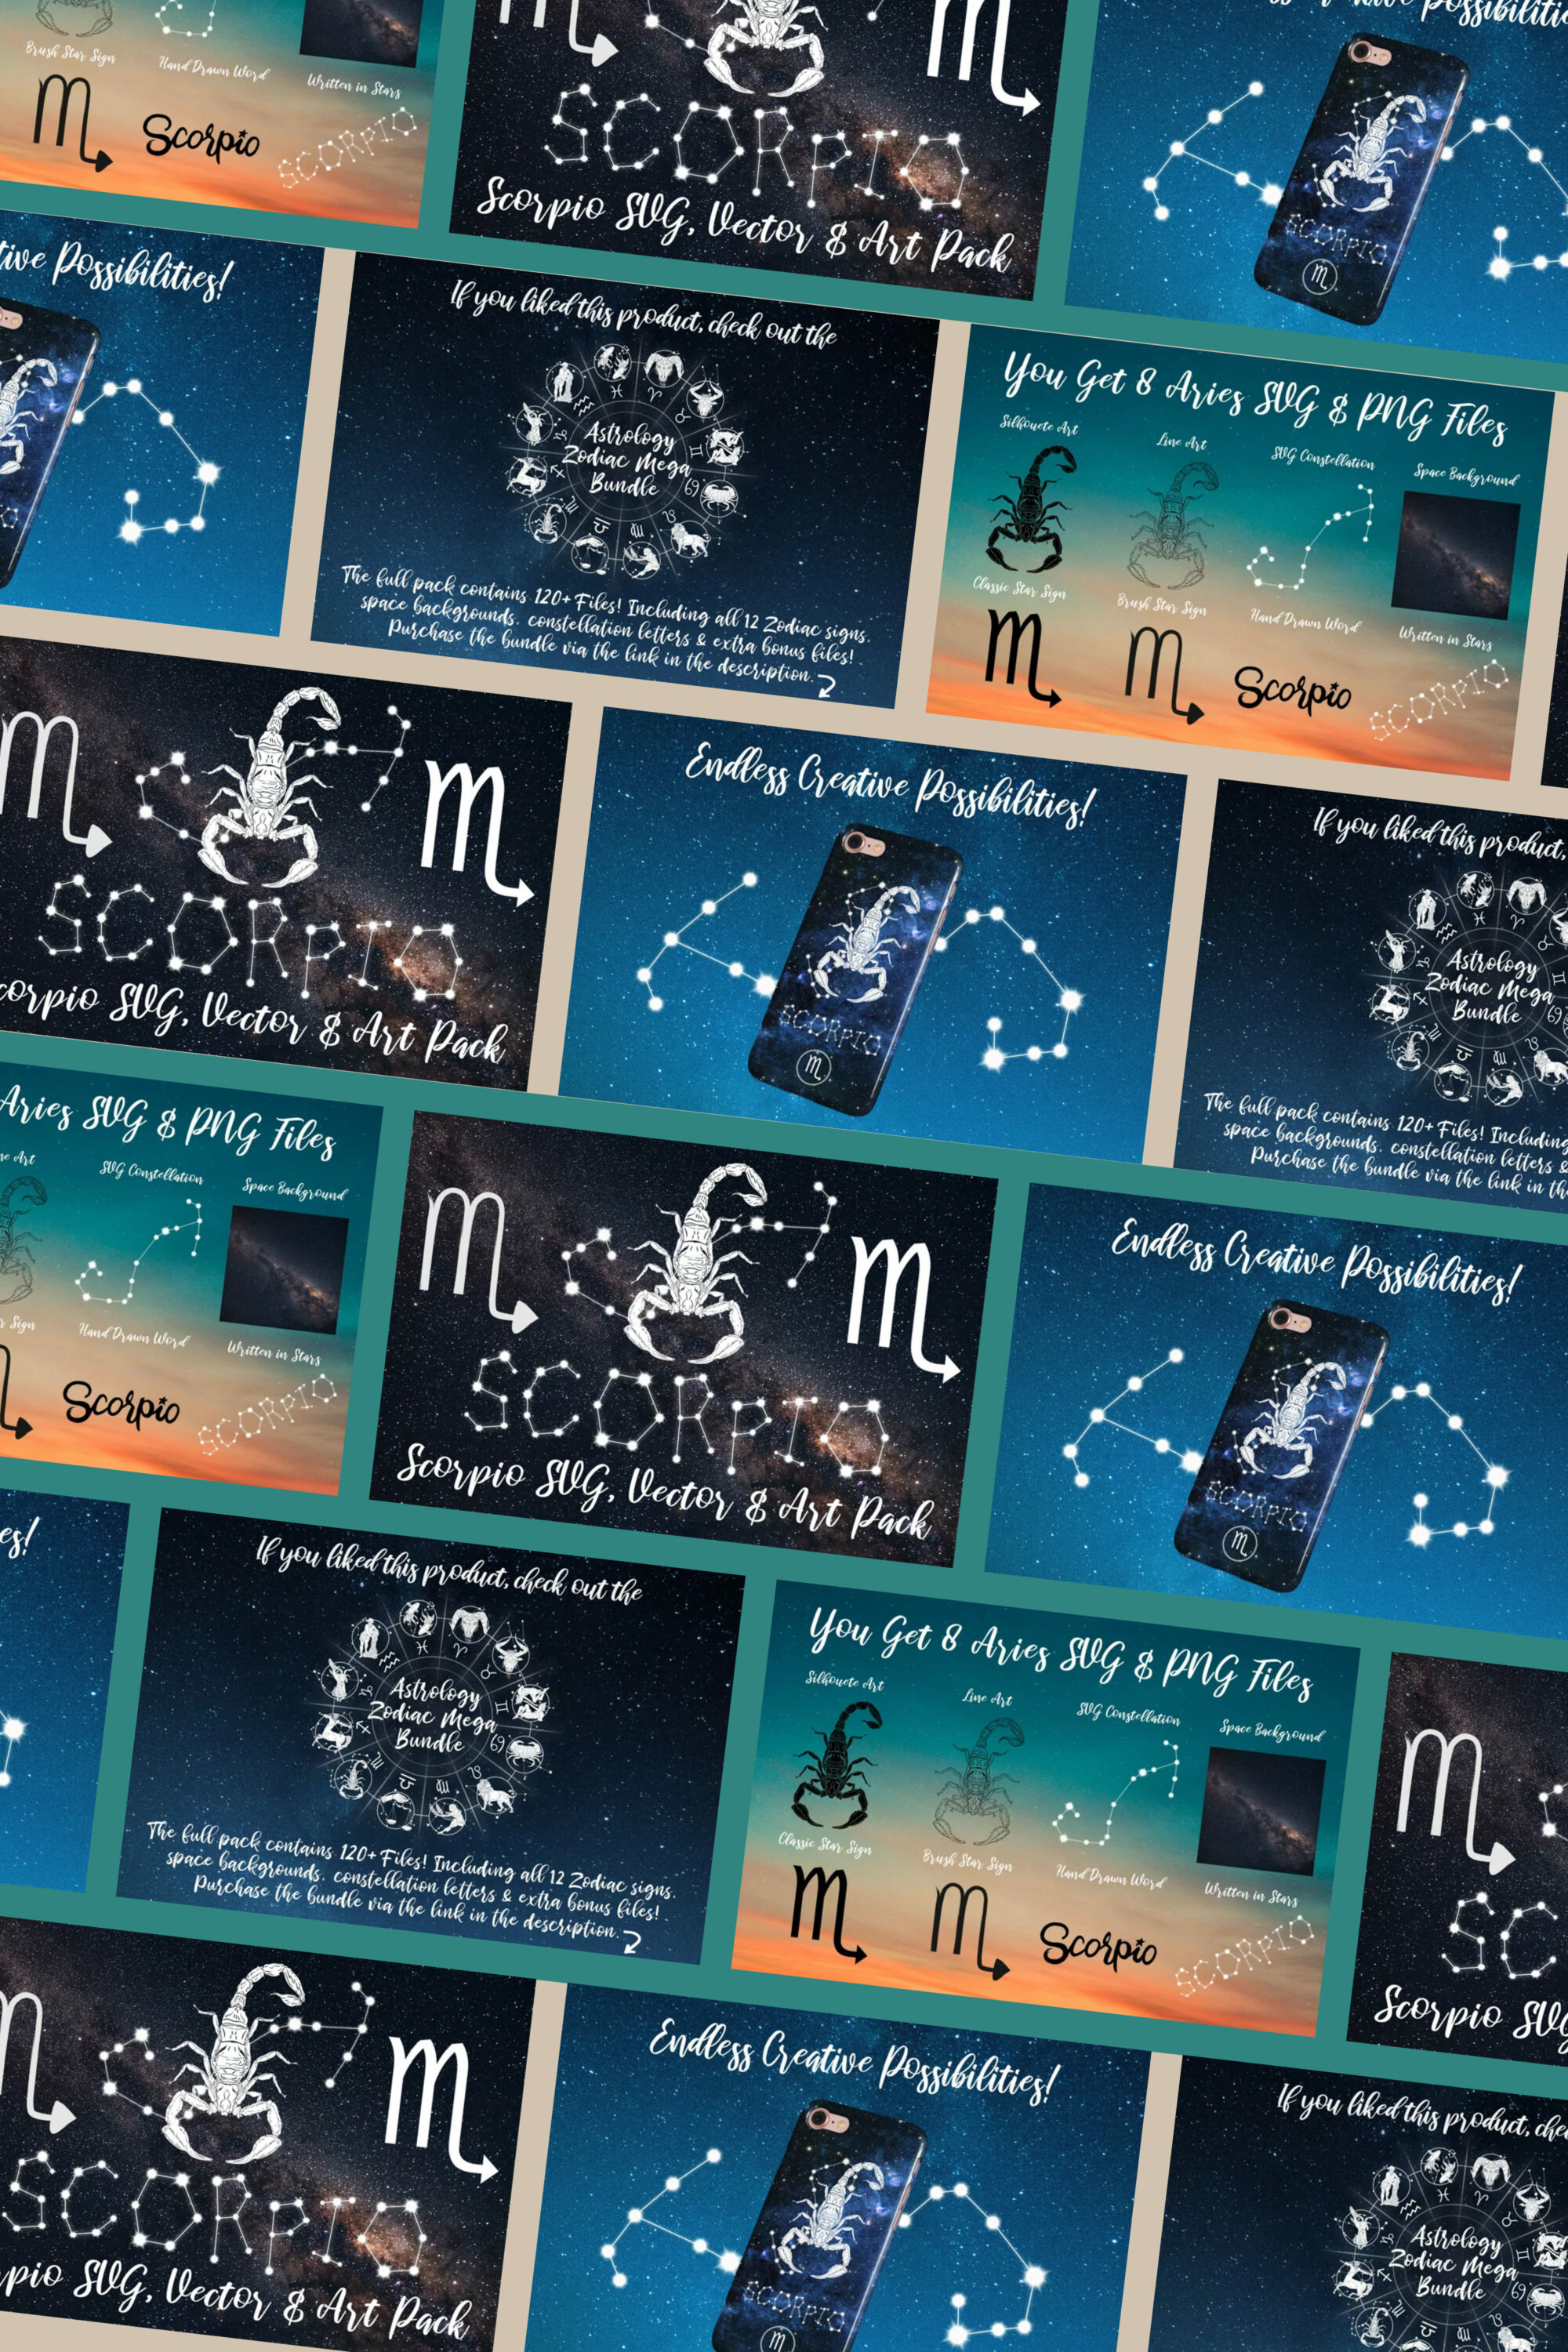 Series of business cards with zodiac signs on them.